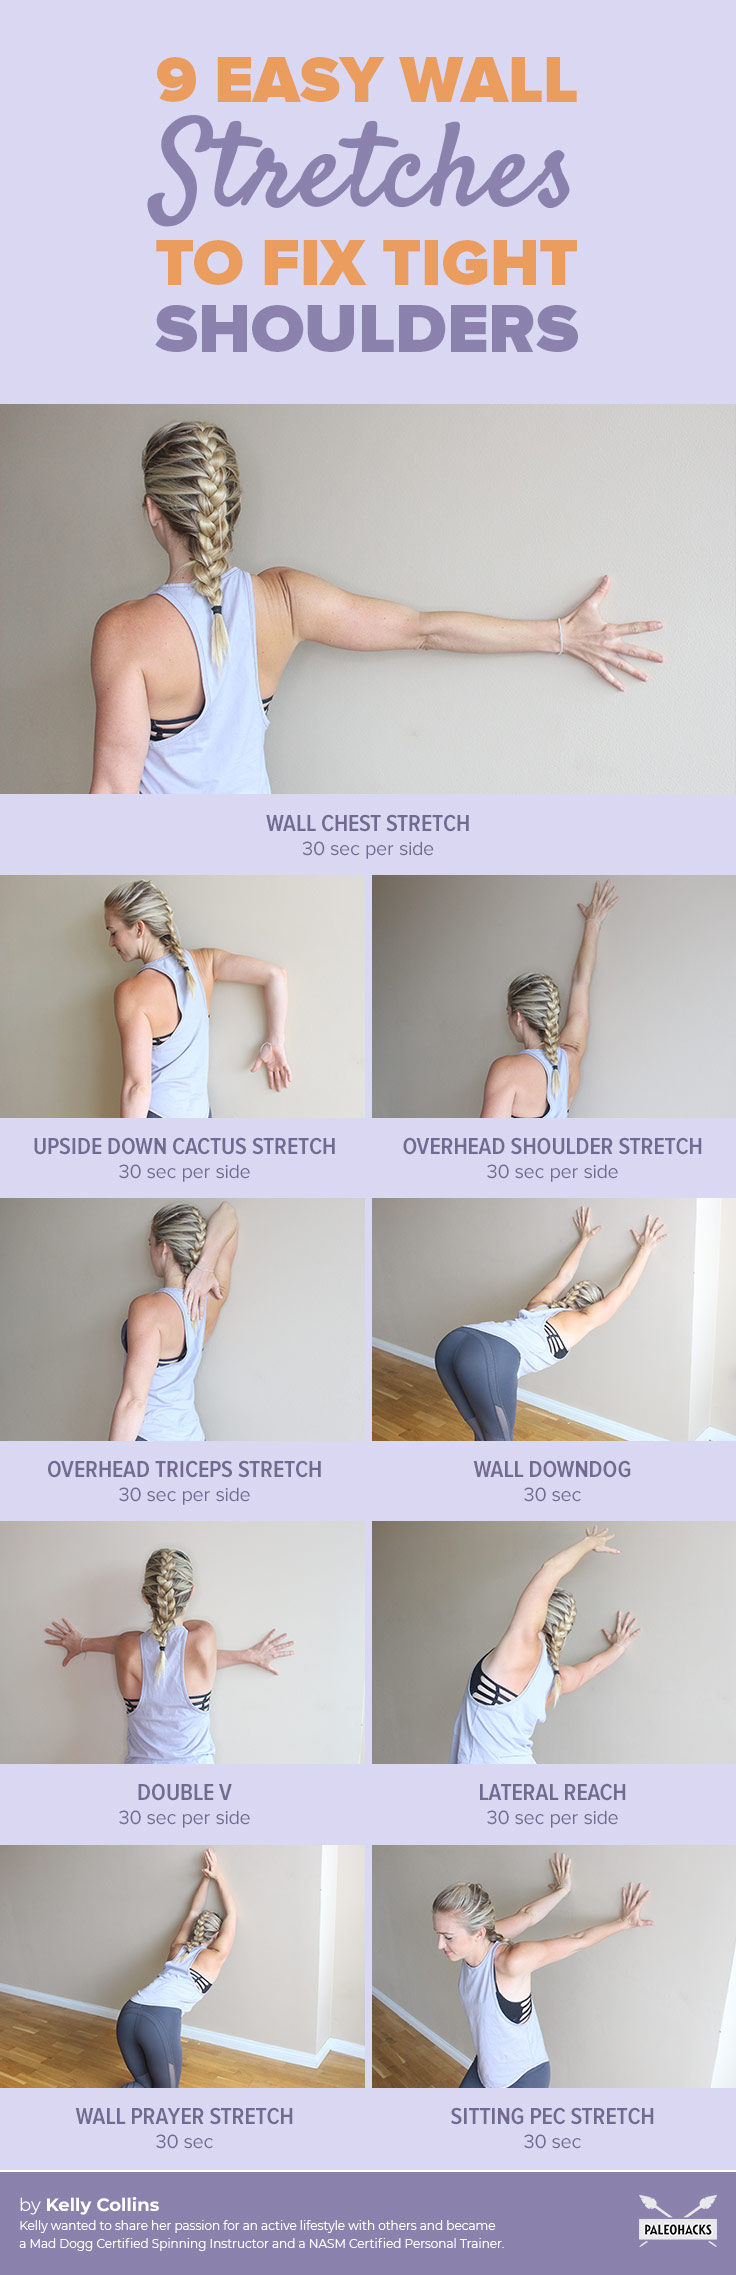 9-easy-wall-stretches-to-fix-tight-shoulders-infog.jpg